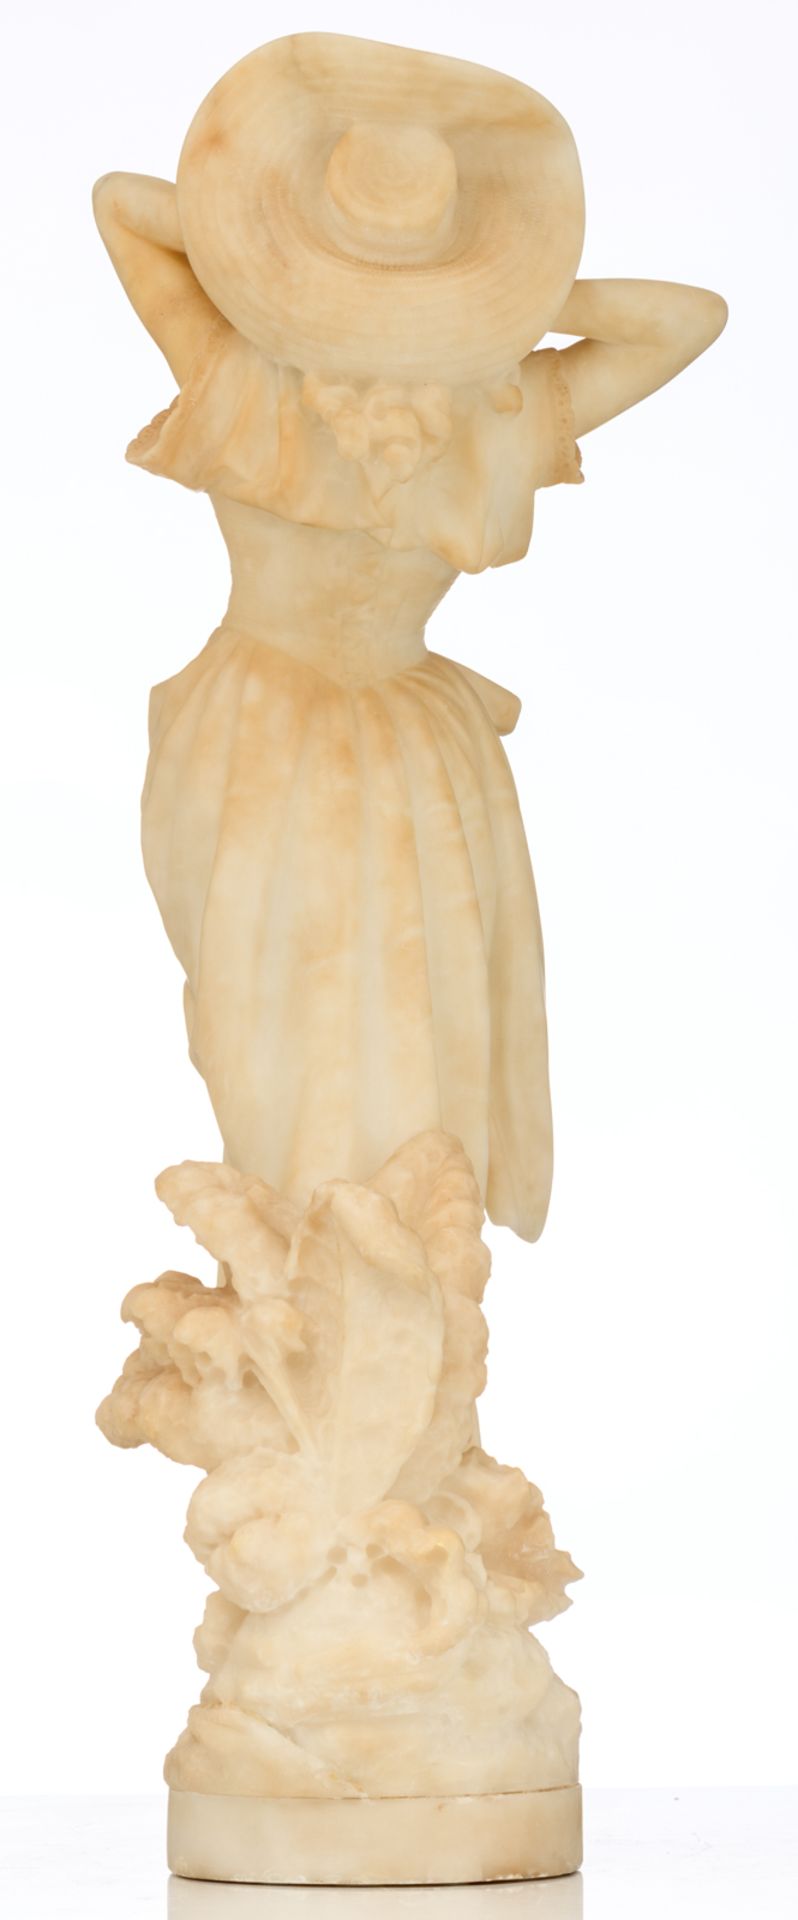 No visible signature, a beauty standing in a garden setting, alabaster, H 90 cm - Image 3 of 4